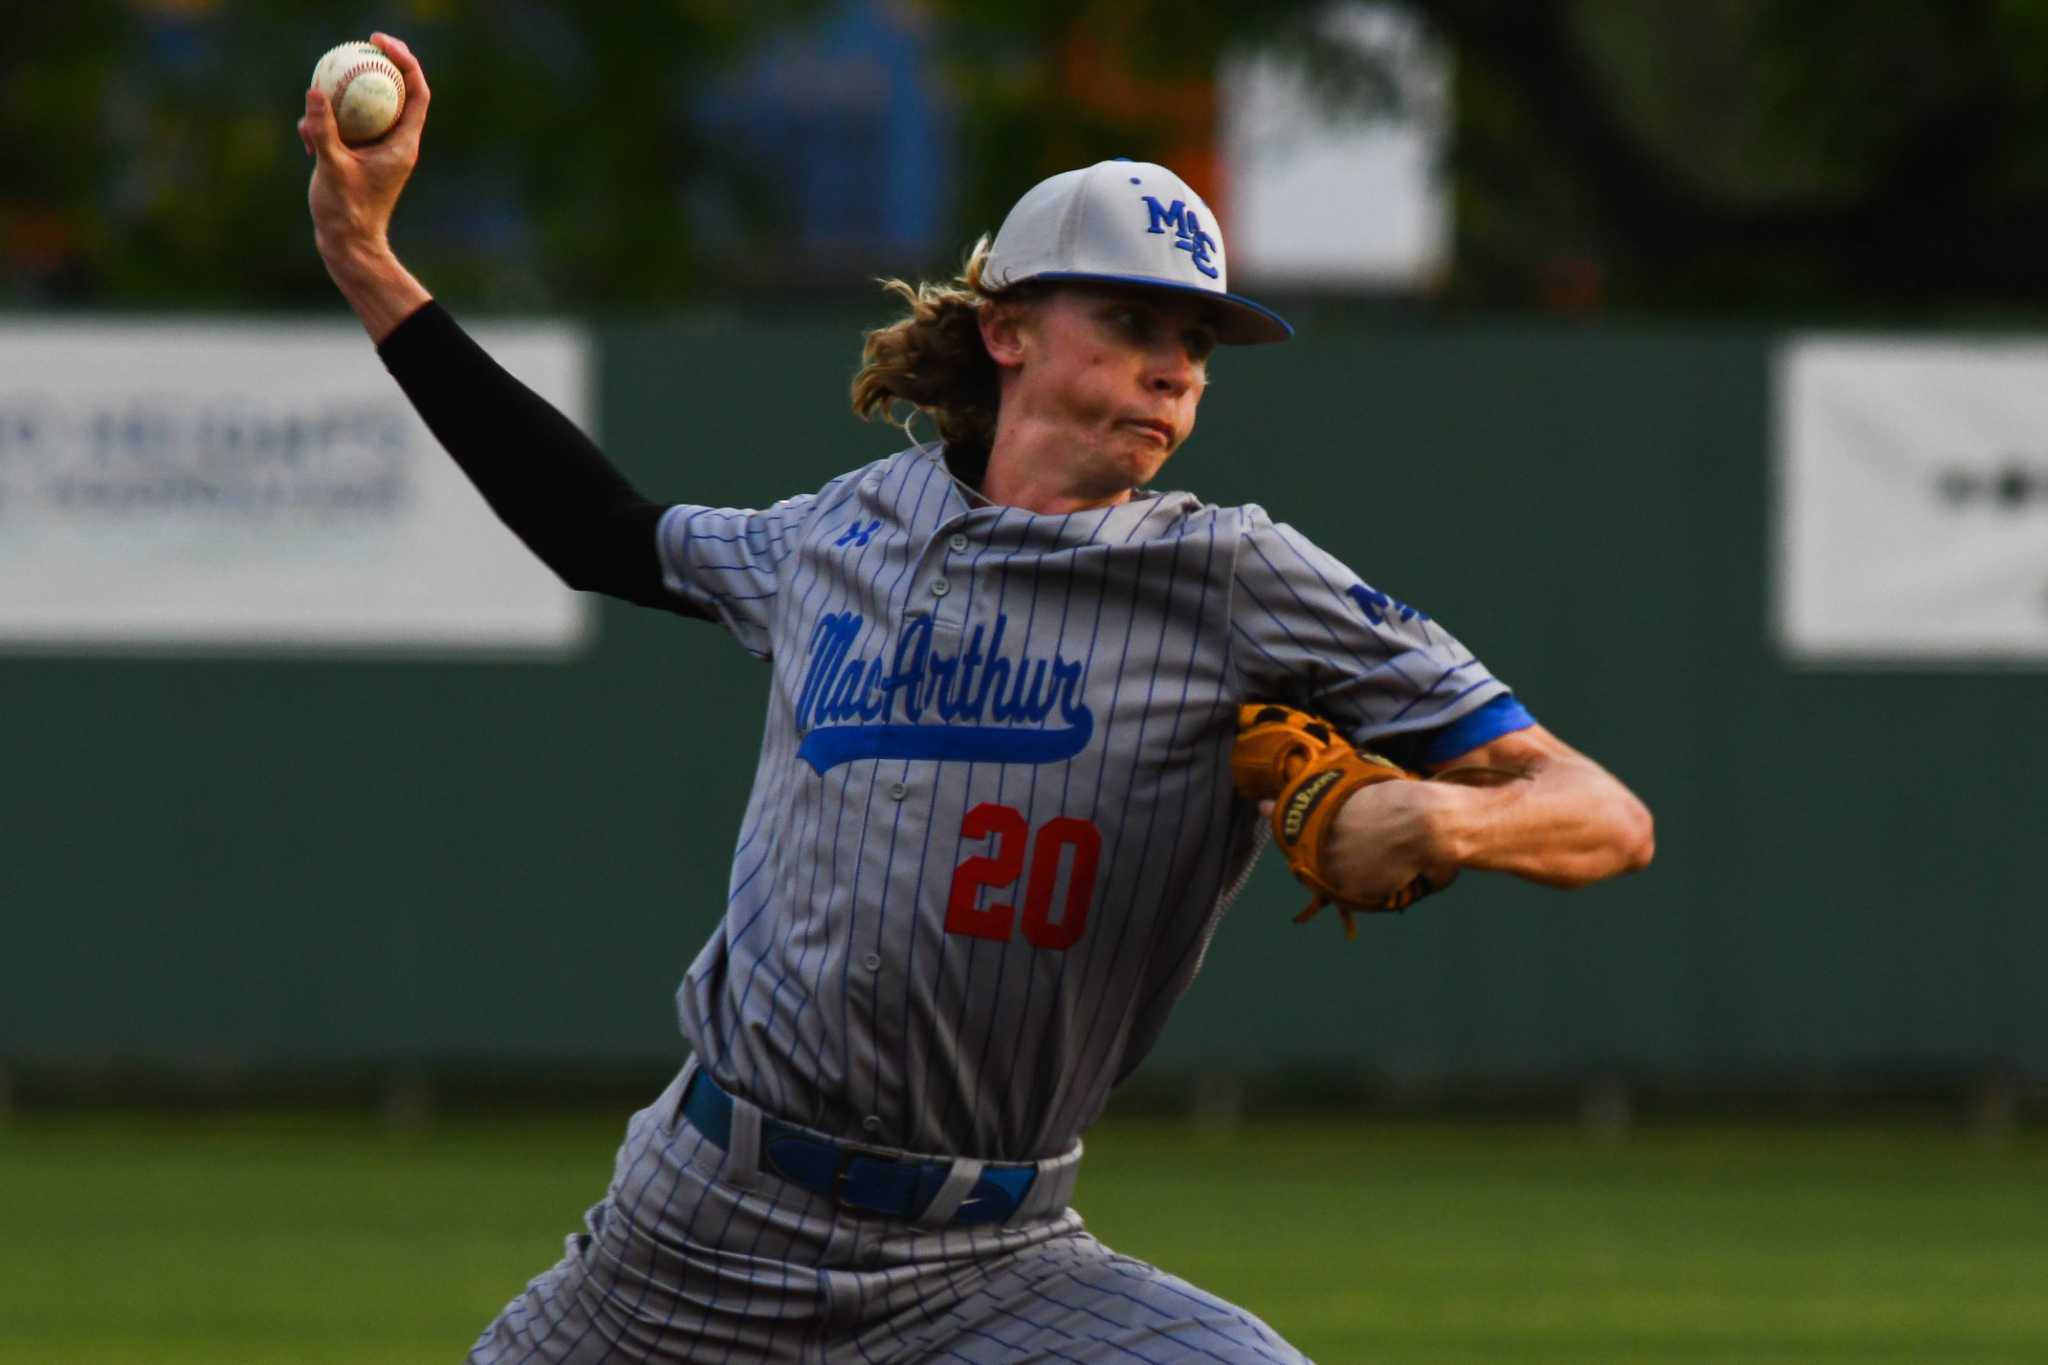 MacArthur charges into the high school baseball playoffs